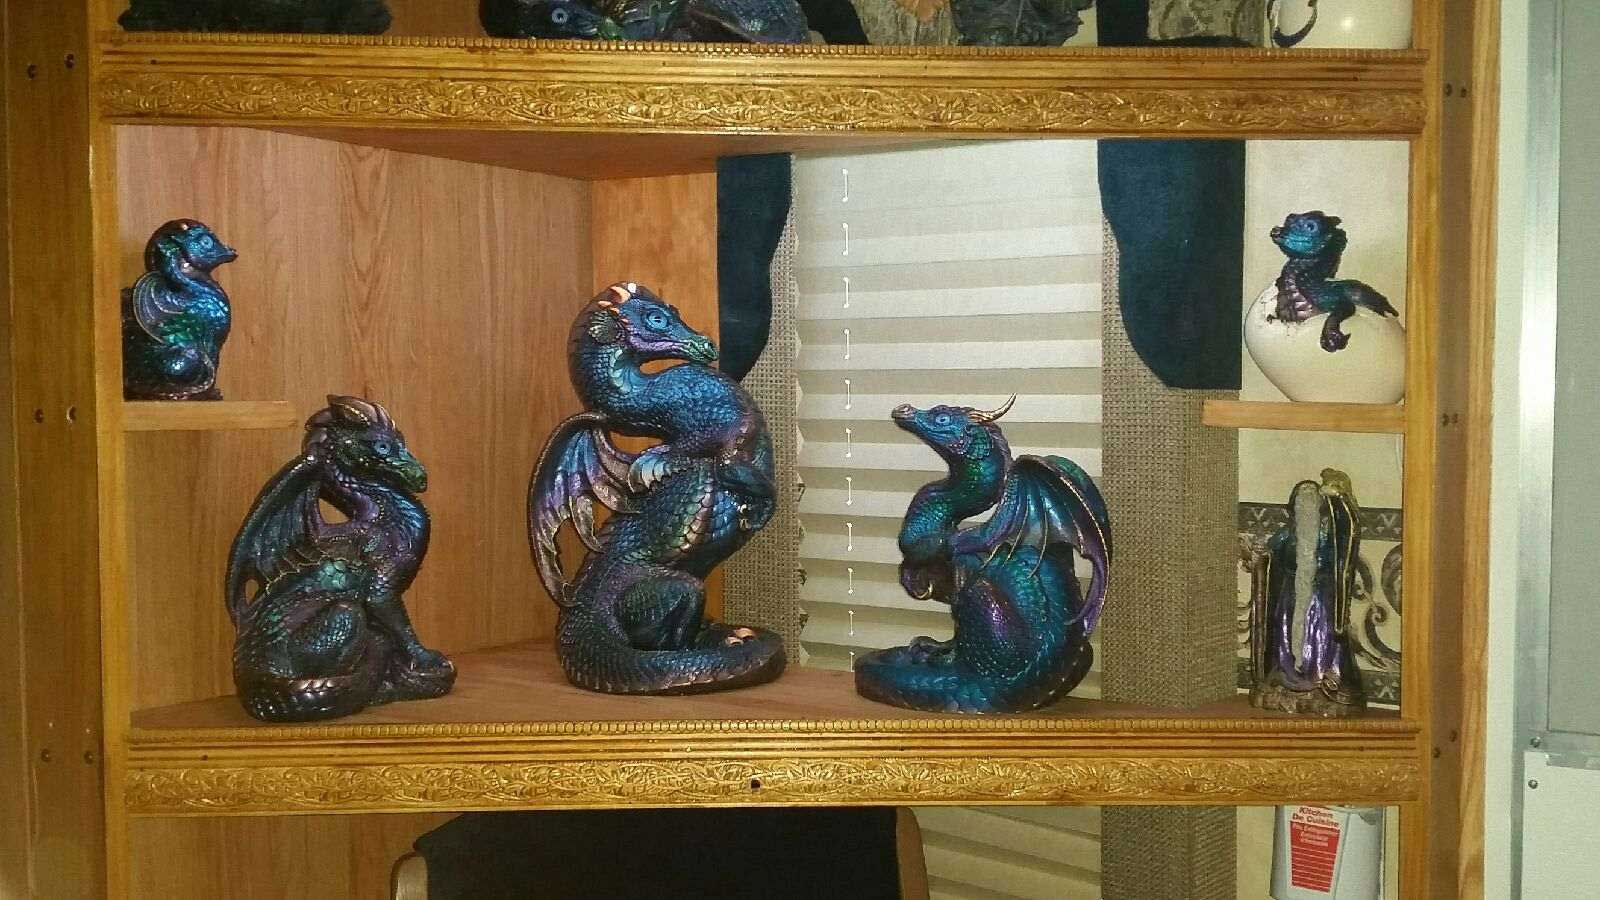 My Peacock Dragon collection